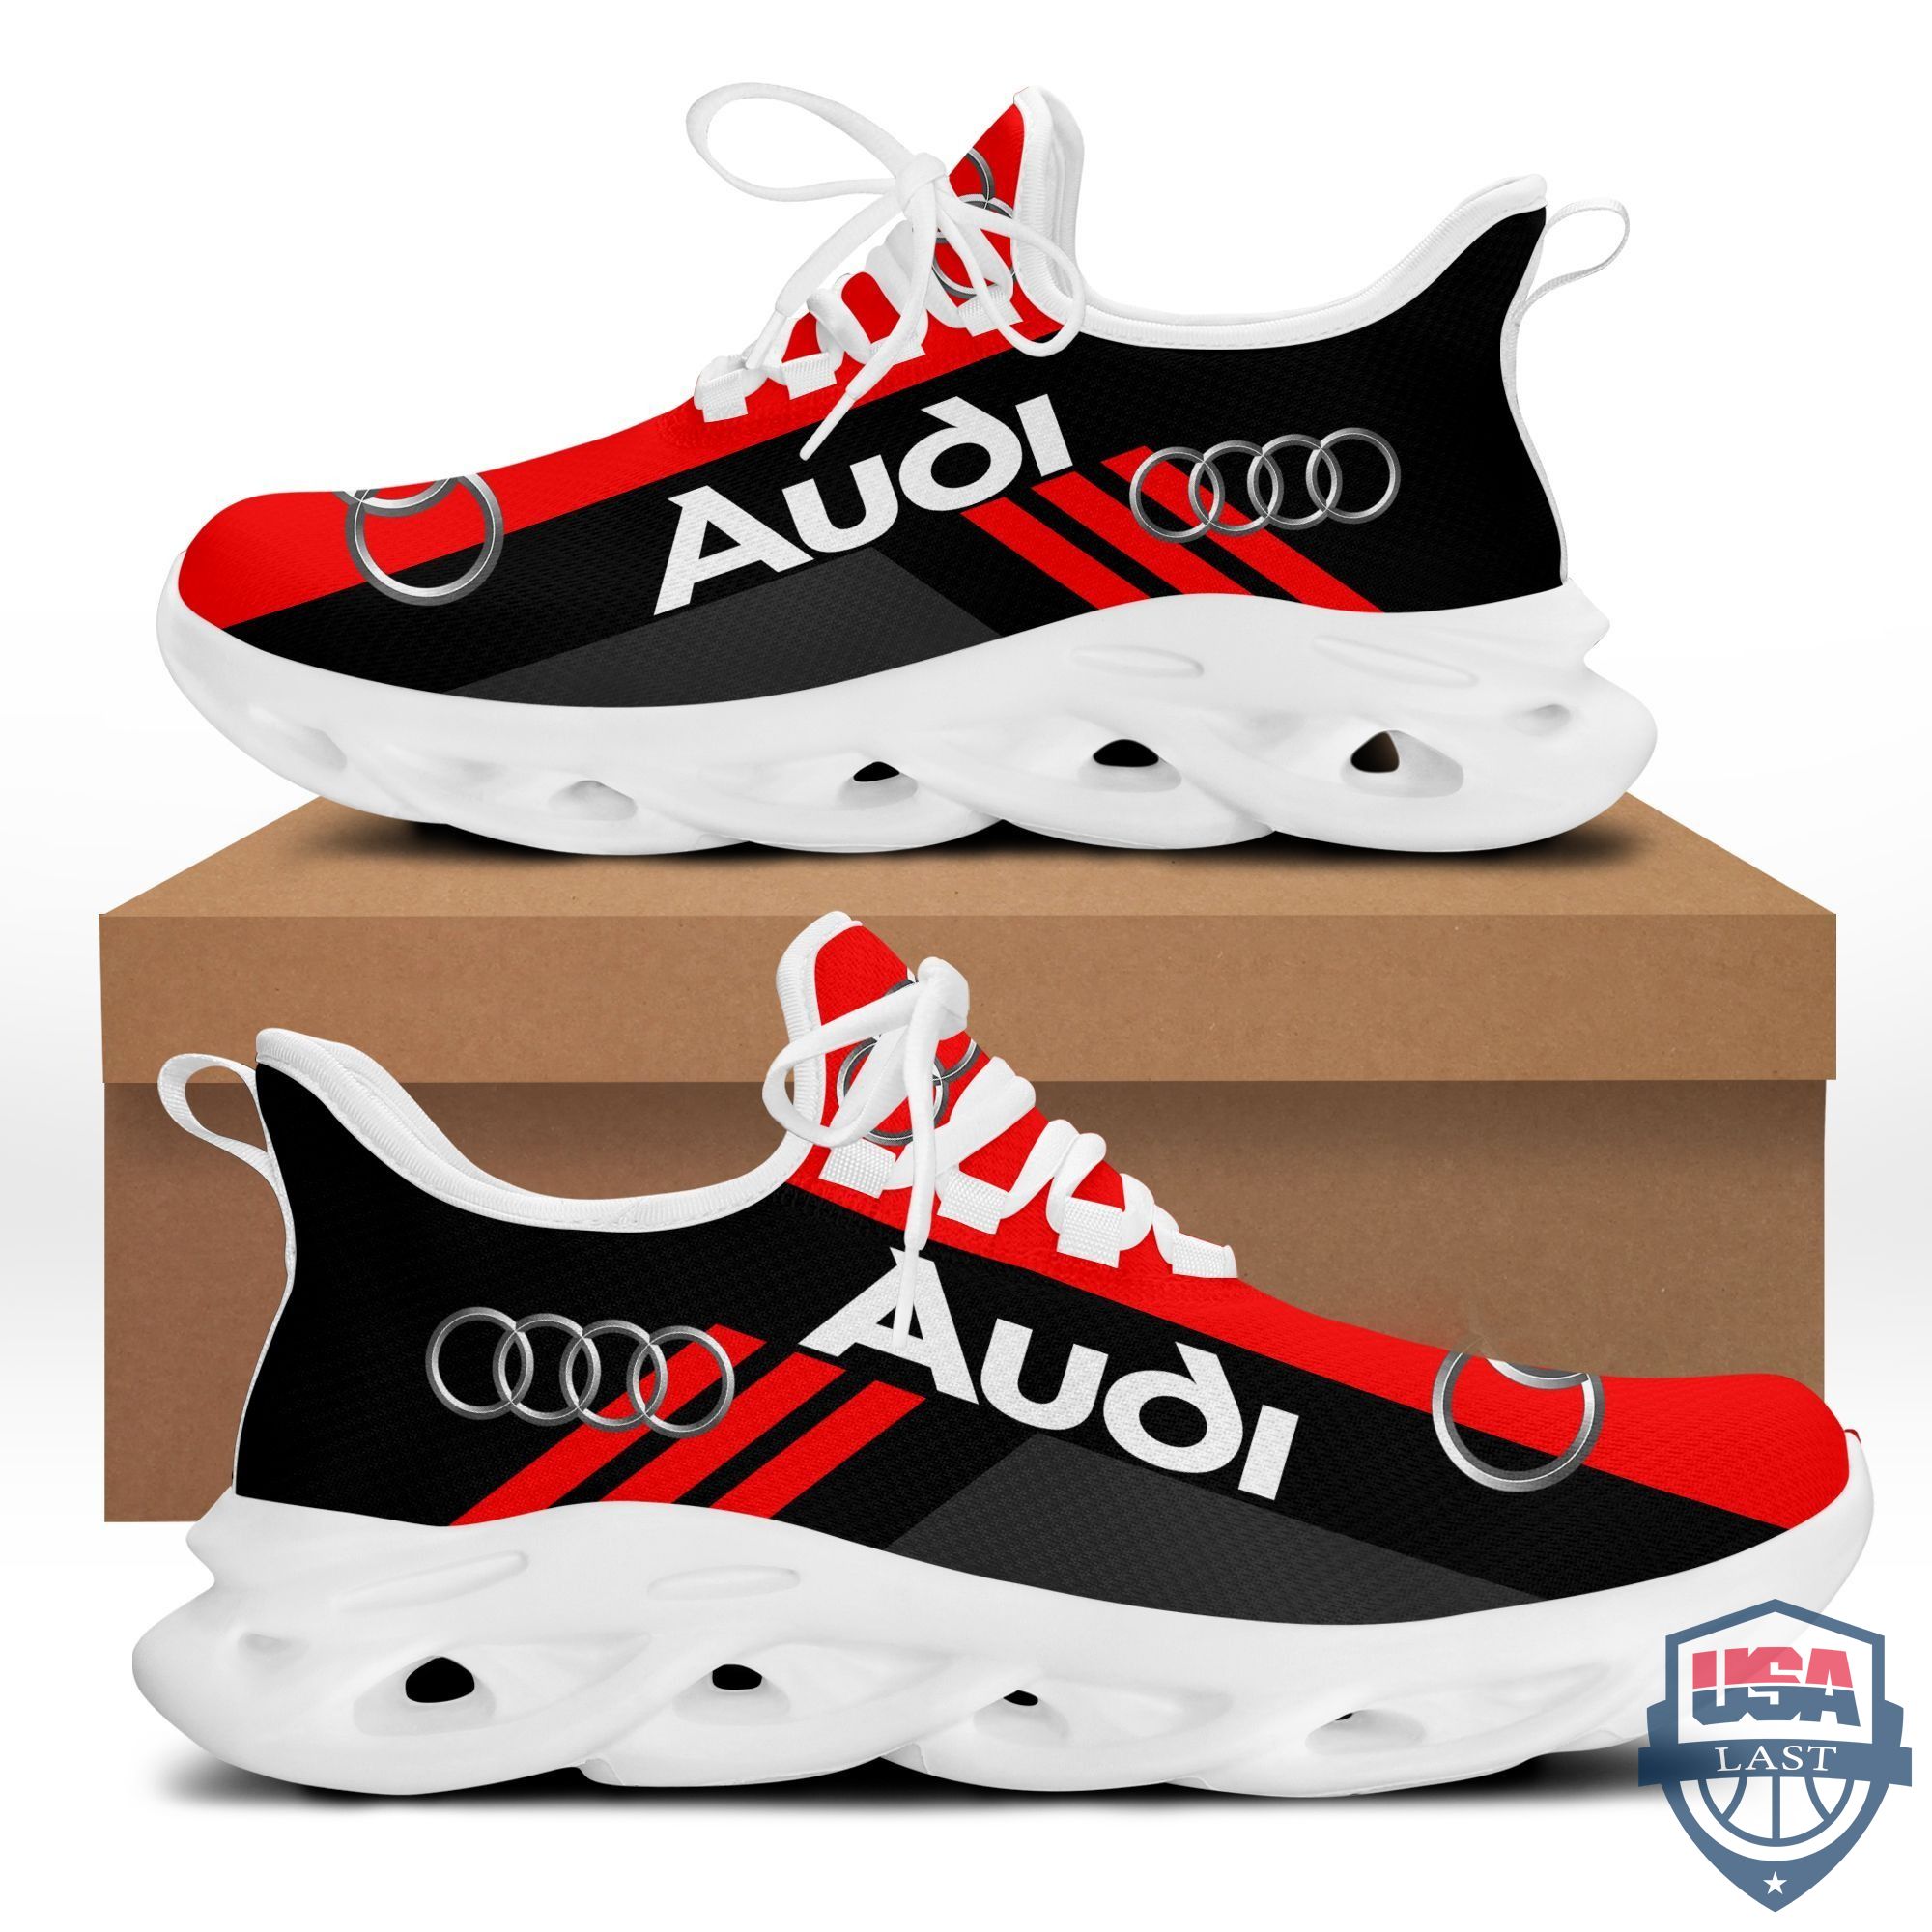 Audi Sneaker Max Soul Shoes Red Version